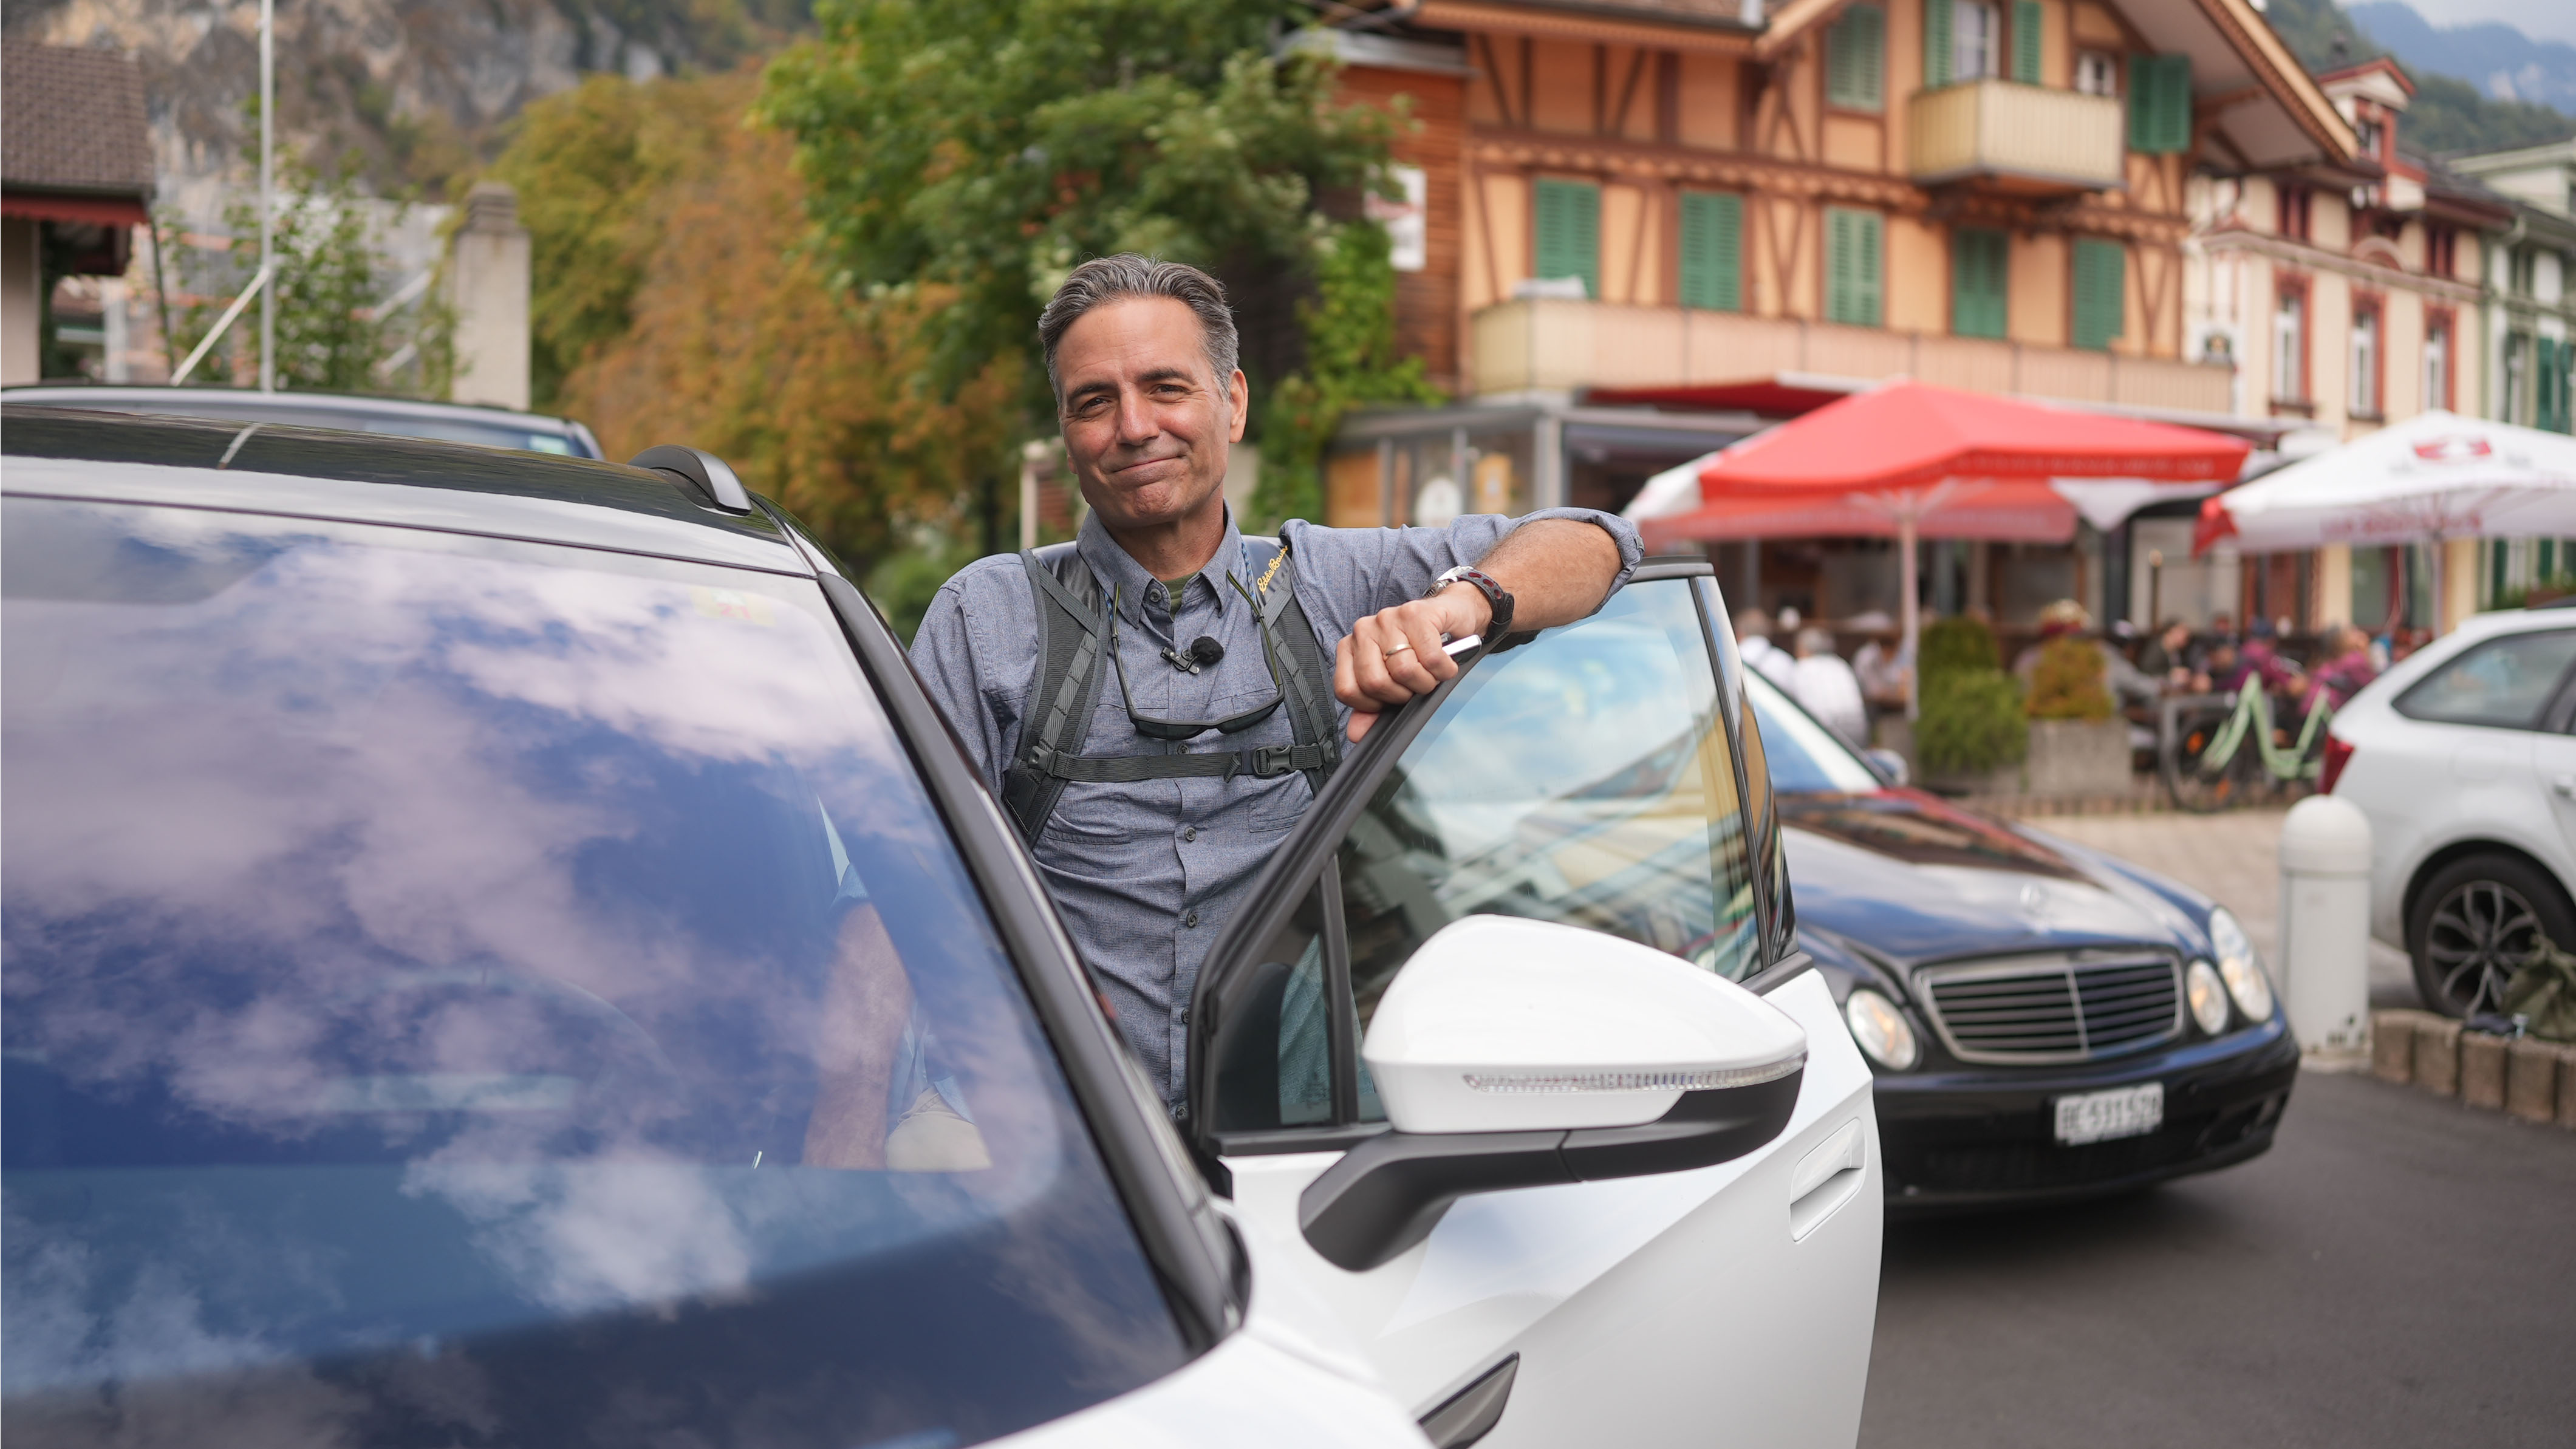 Jeff visits a Swiss Village via EV. Download a zipped file of promotional materials in the Additional Assets section below.